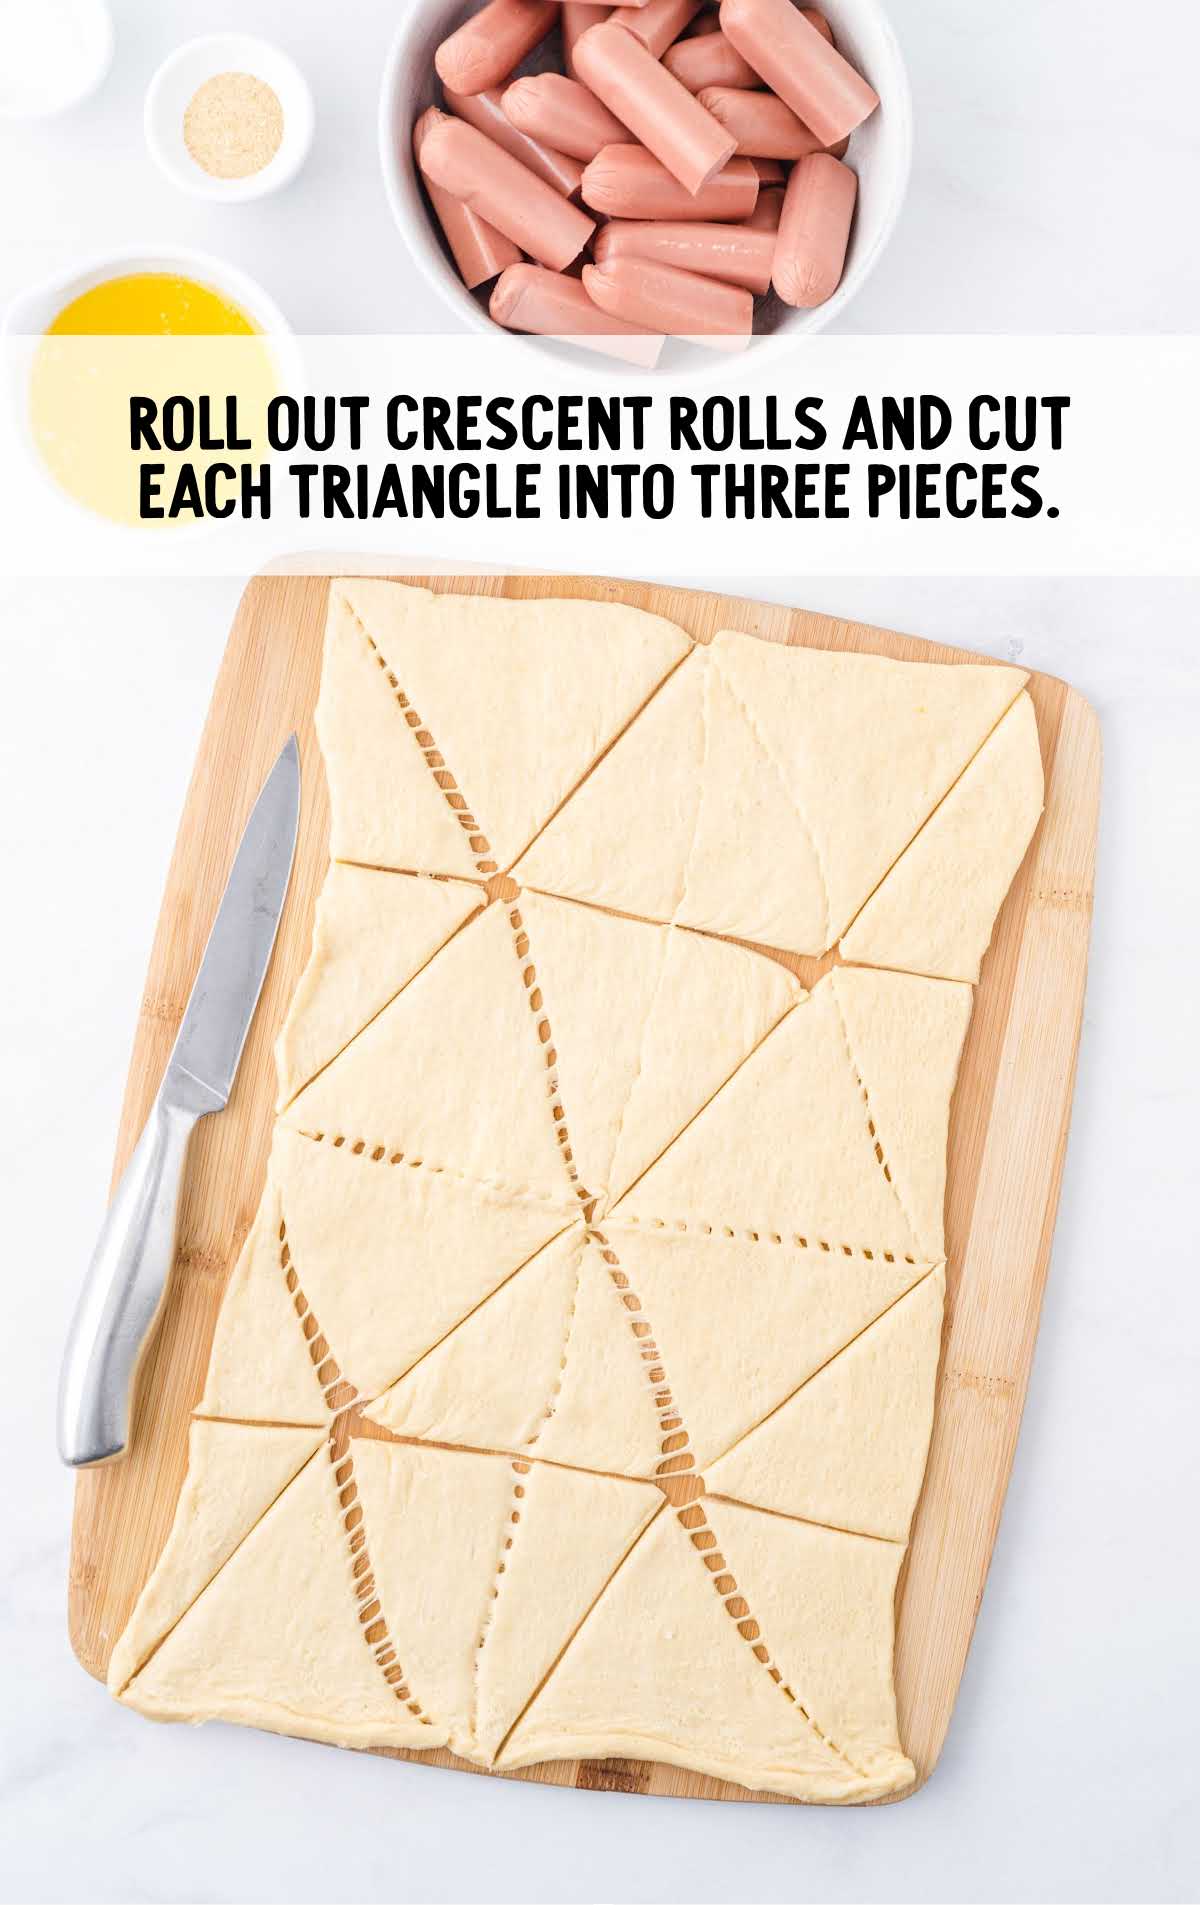 crescent rolls rolled and cut into 3 pieces